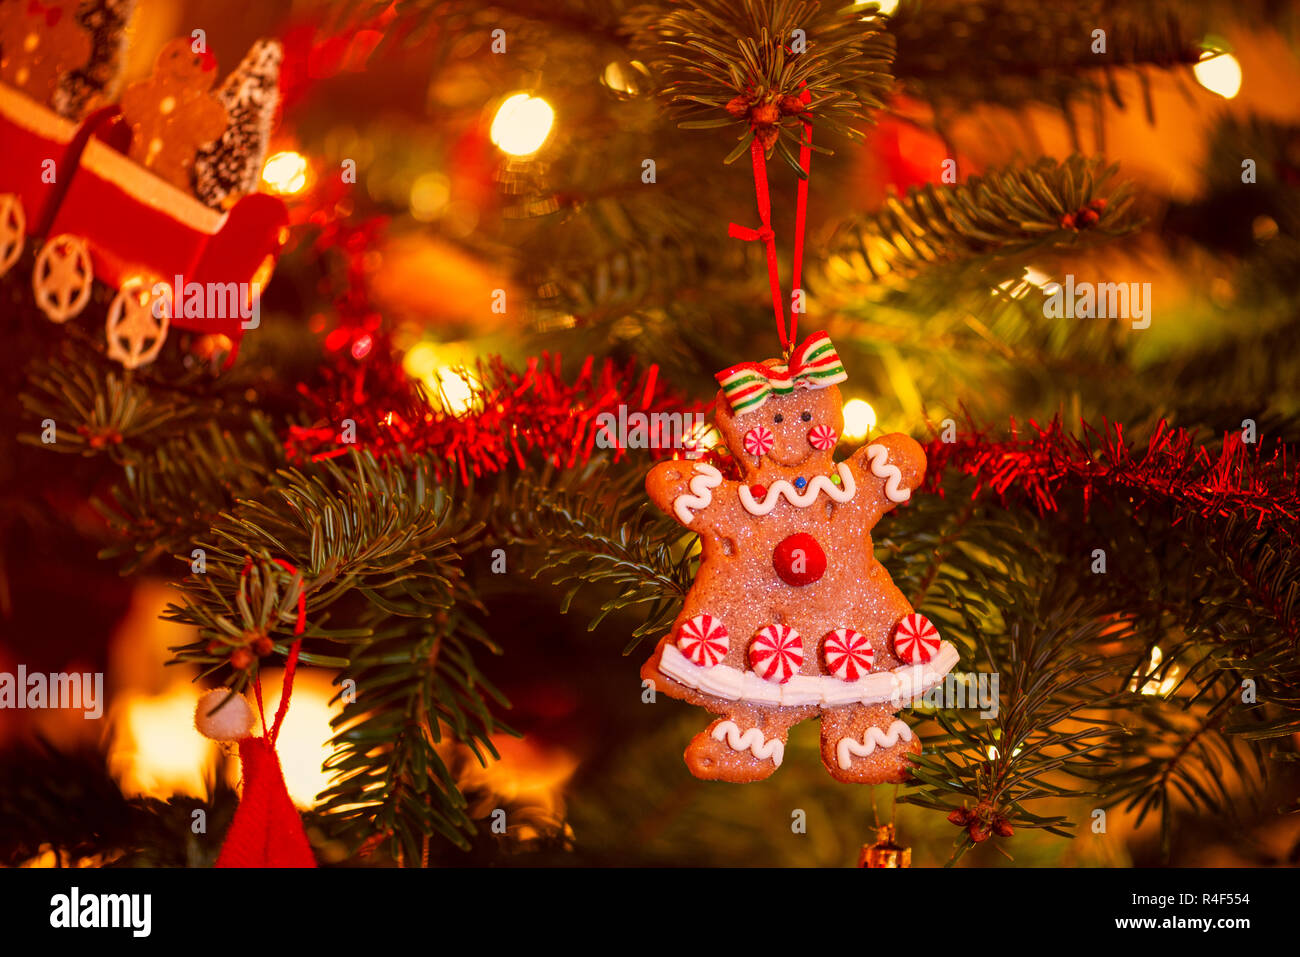 Gingerbread Cookie hanging in Christmas Tree Stock Photo